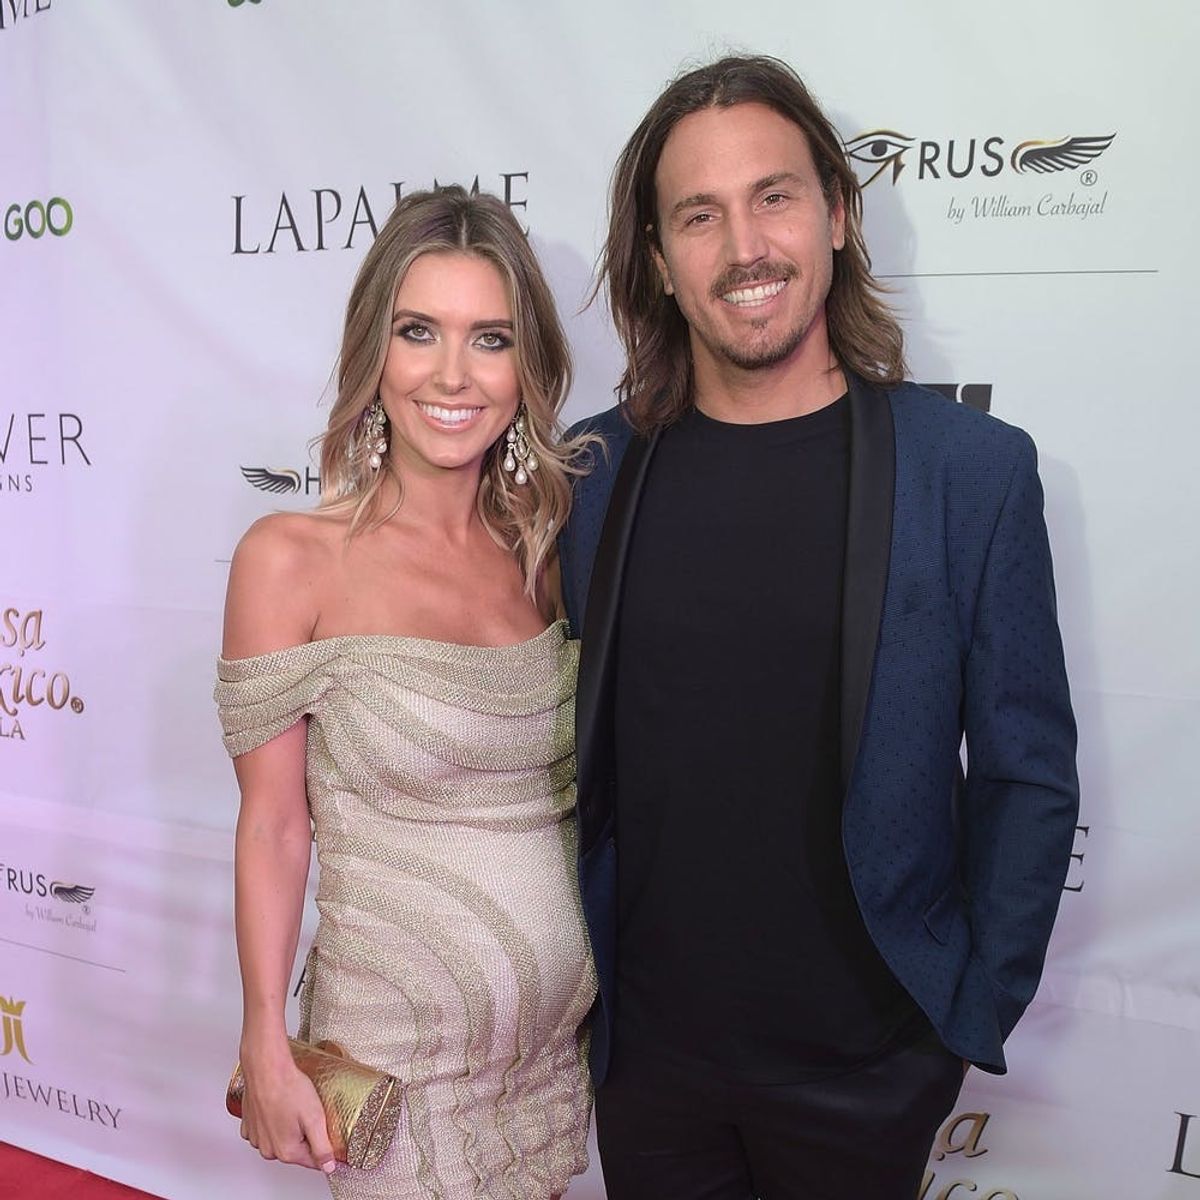 Audrina Patridge Is a Mom! You’ll Love Her Baby’s Adorably Quirky Name